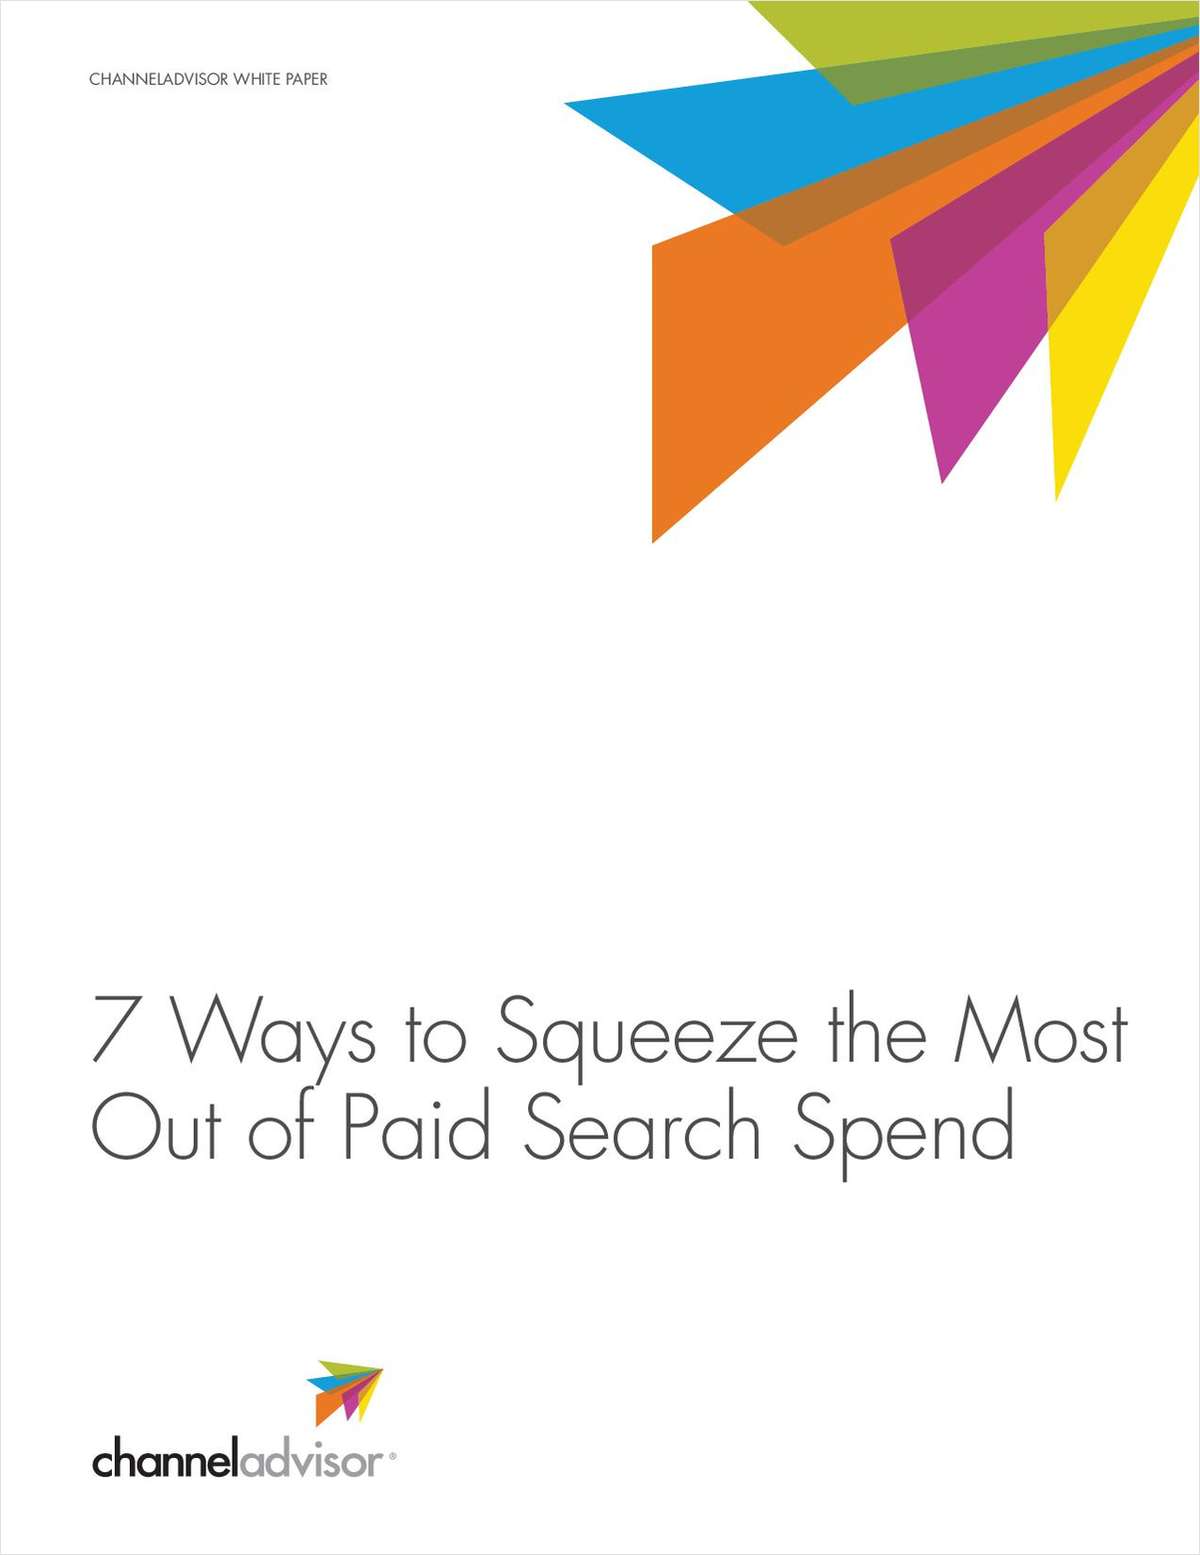 7 Ways Retailers Can Squeeze the Most Out of Paid Search Spend